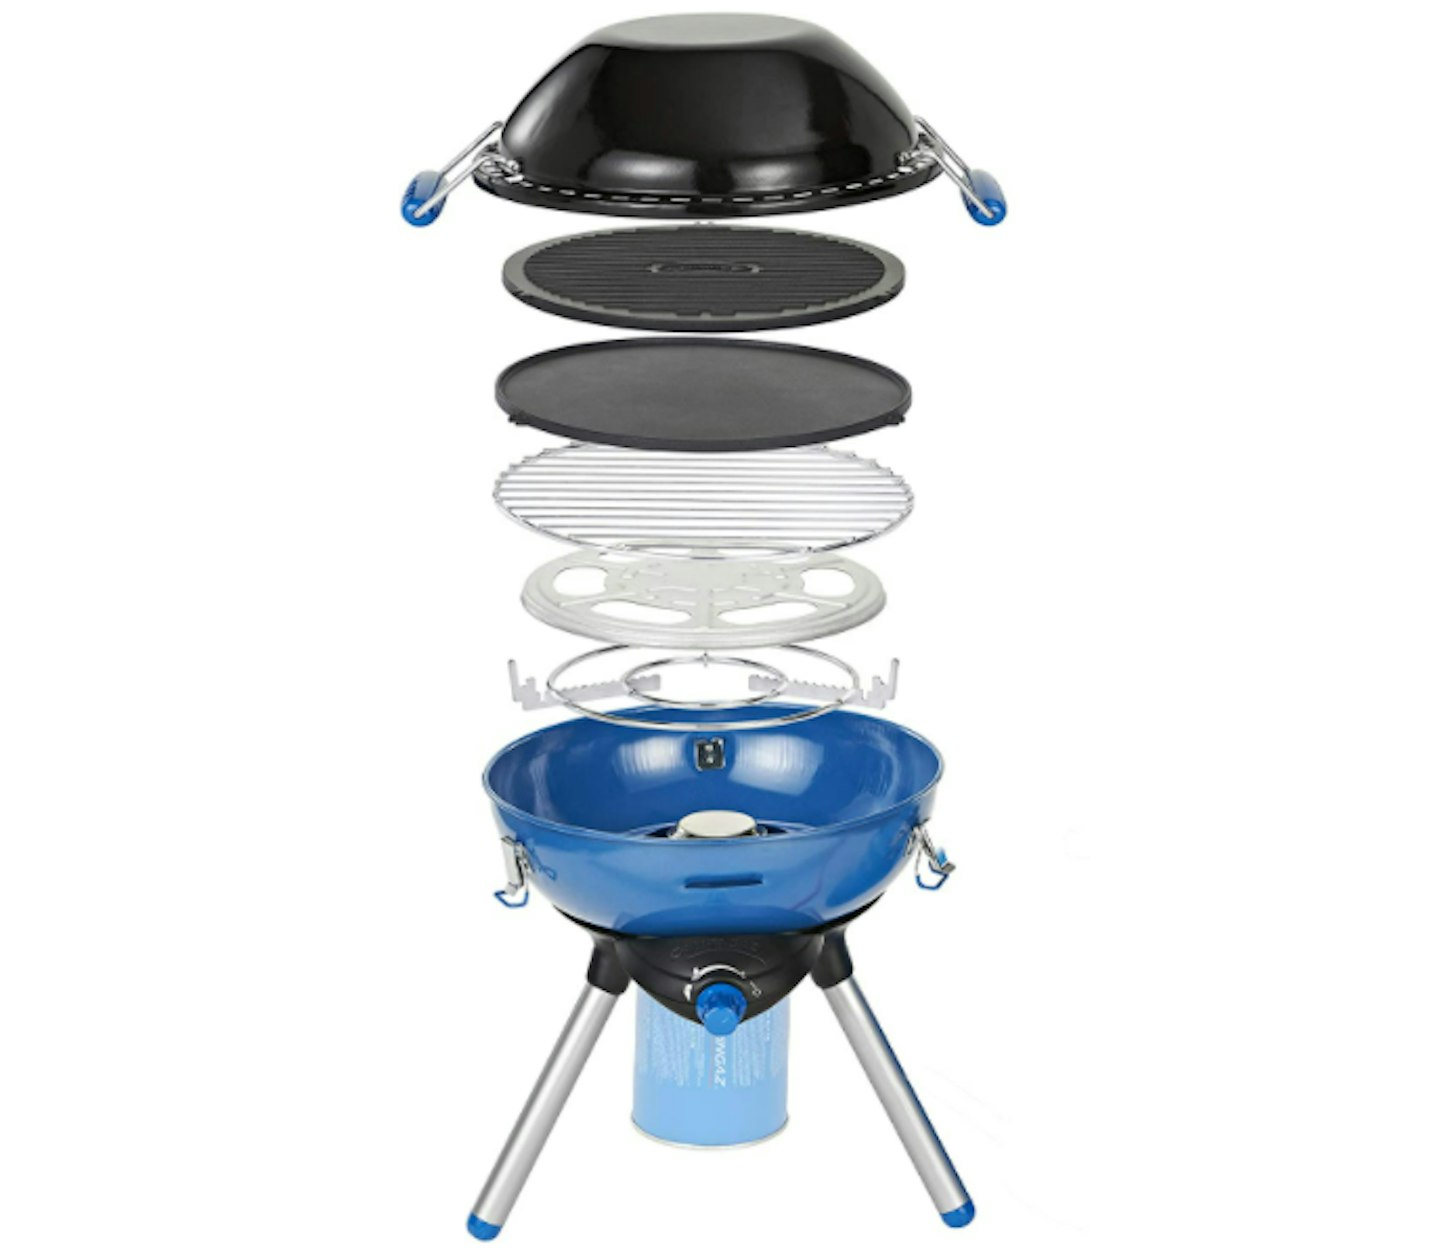 Campingaz Party Grill Gas Stove